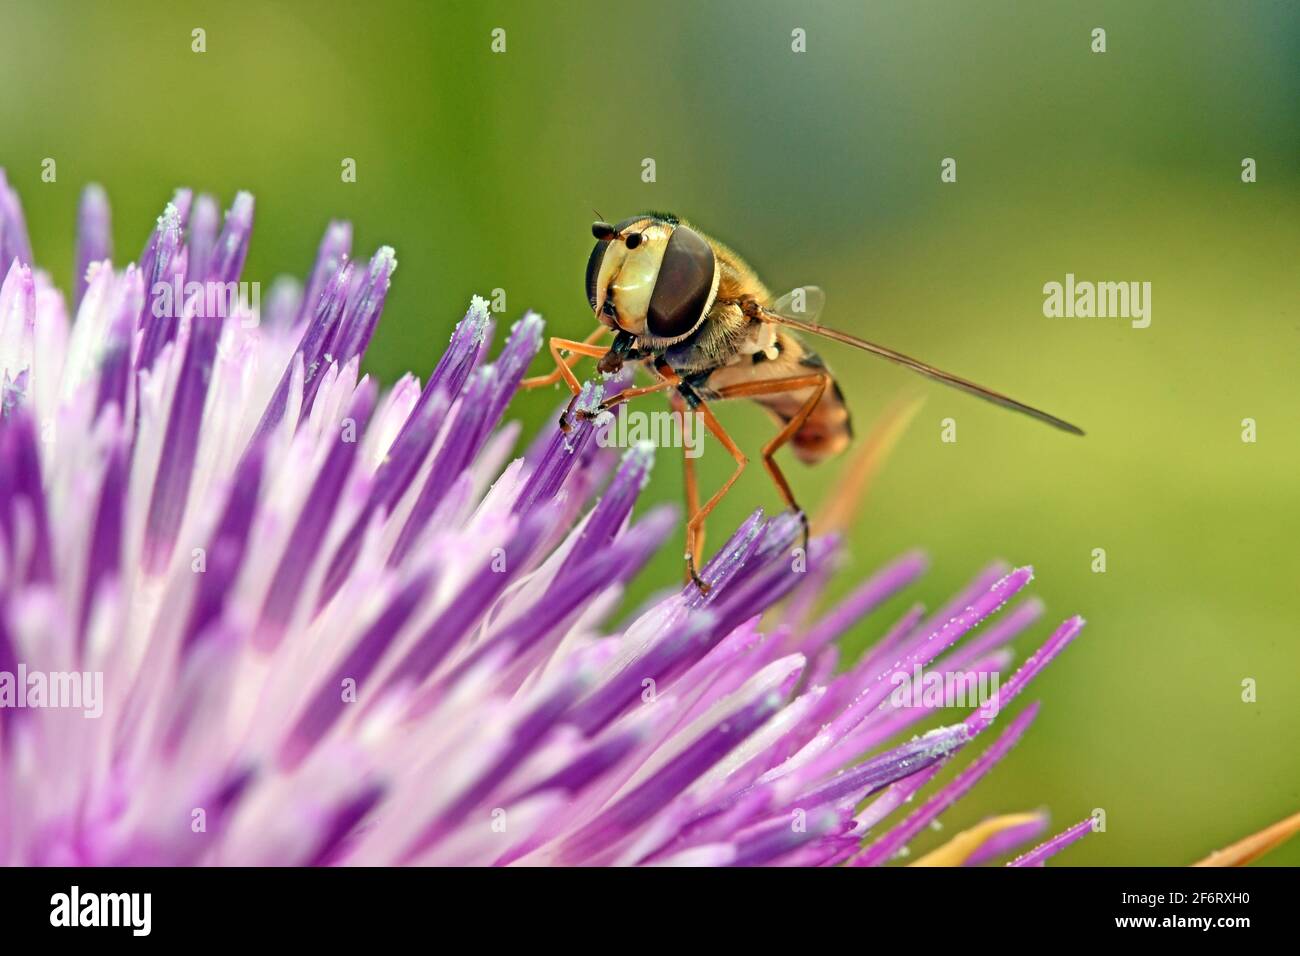 Hover fly on thorn flower Stock Photo